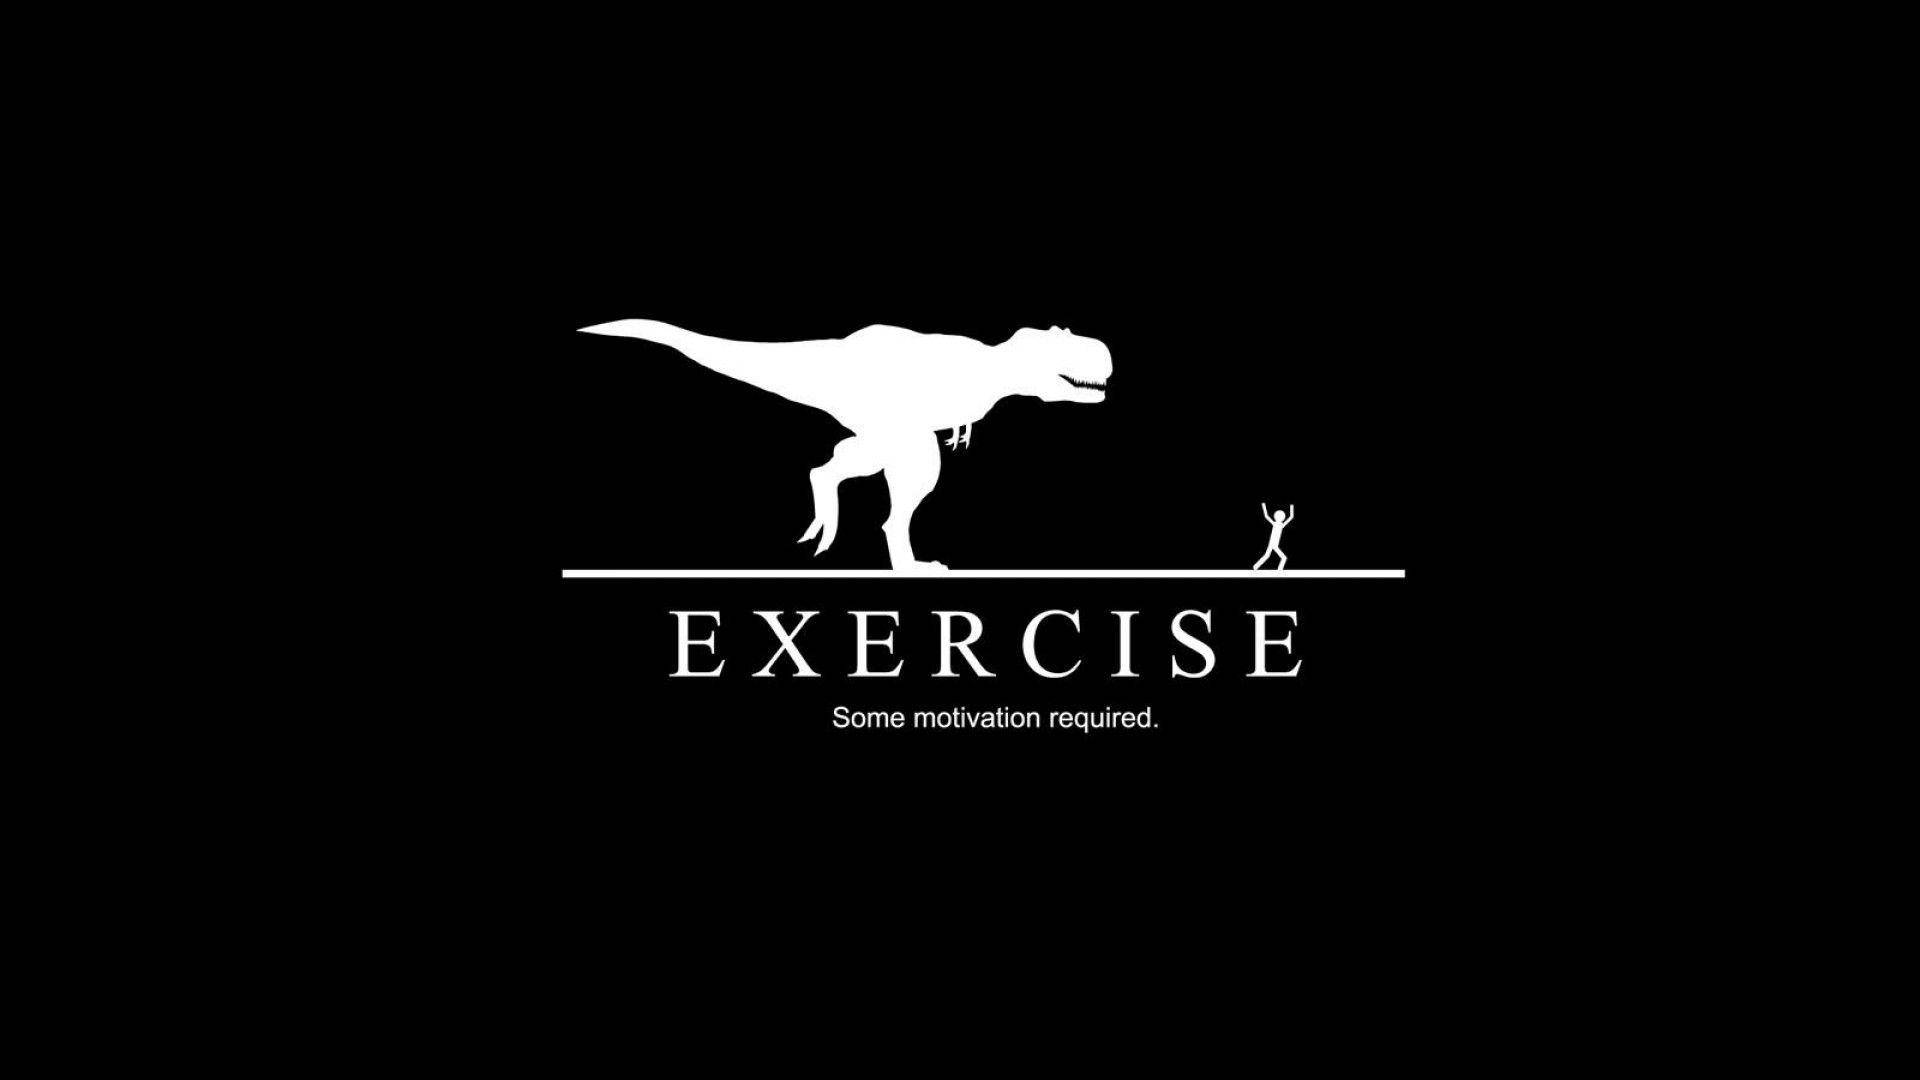 Cool Funny Exercise Motivation